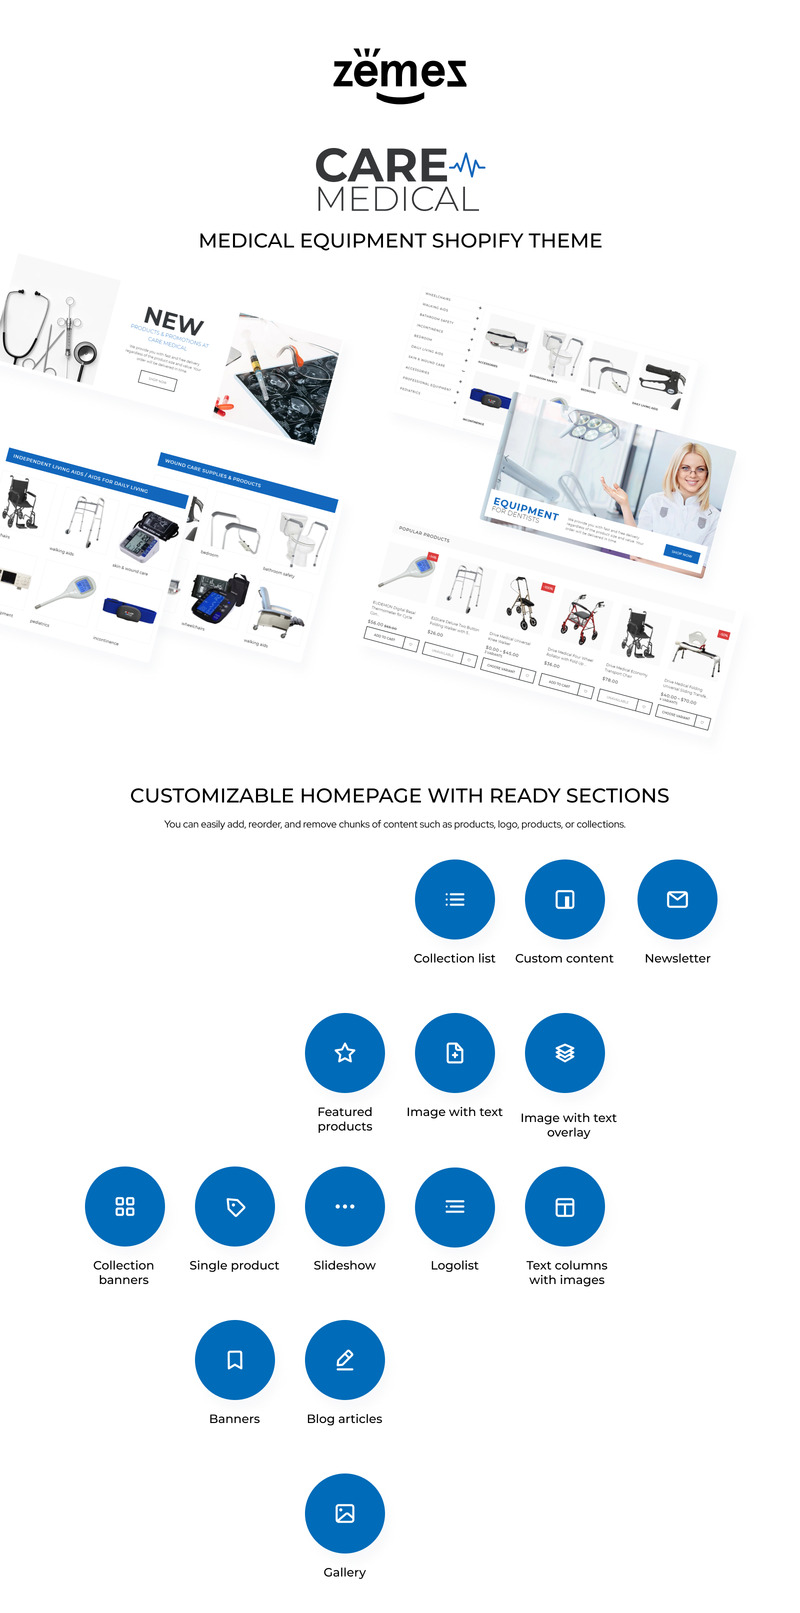 Care - Medical Equipment Shopify Theme - Features Image 1